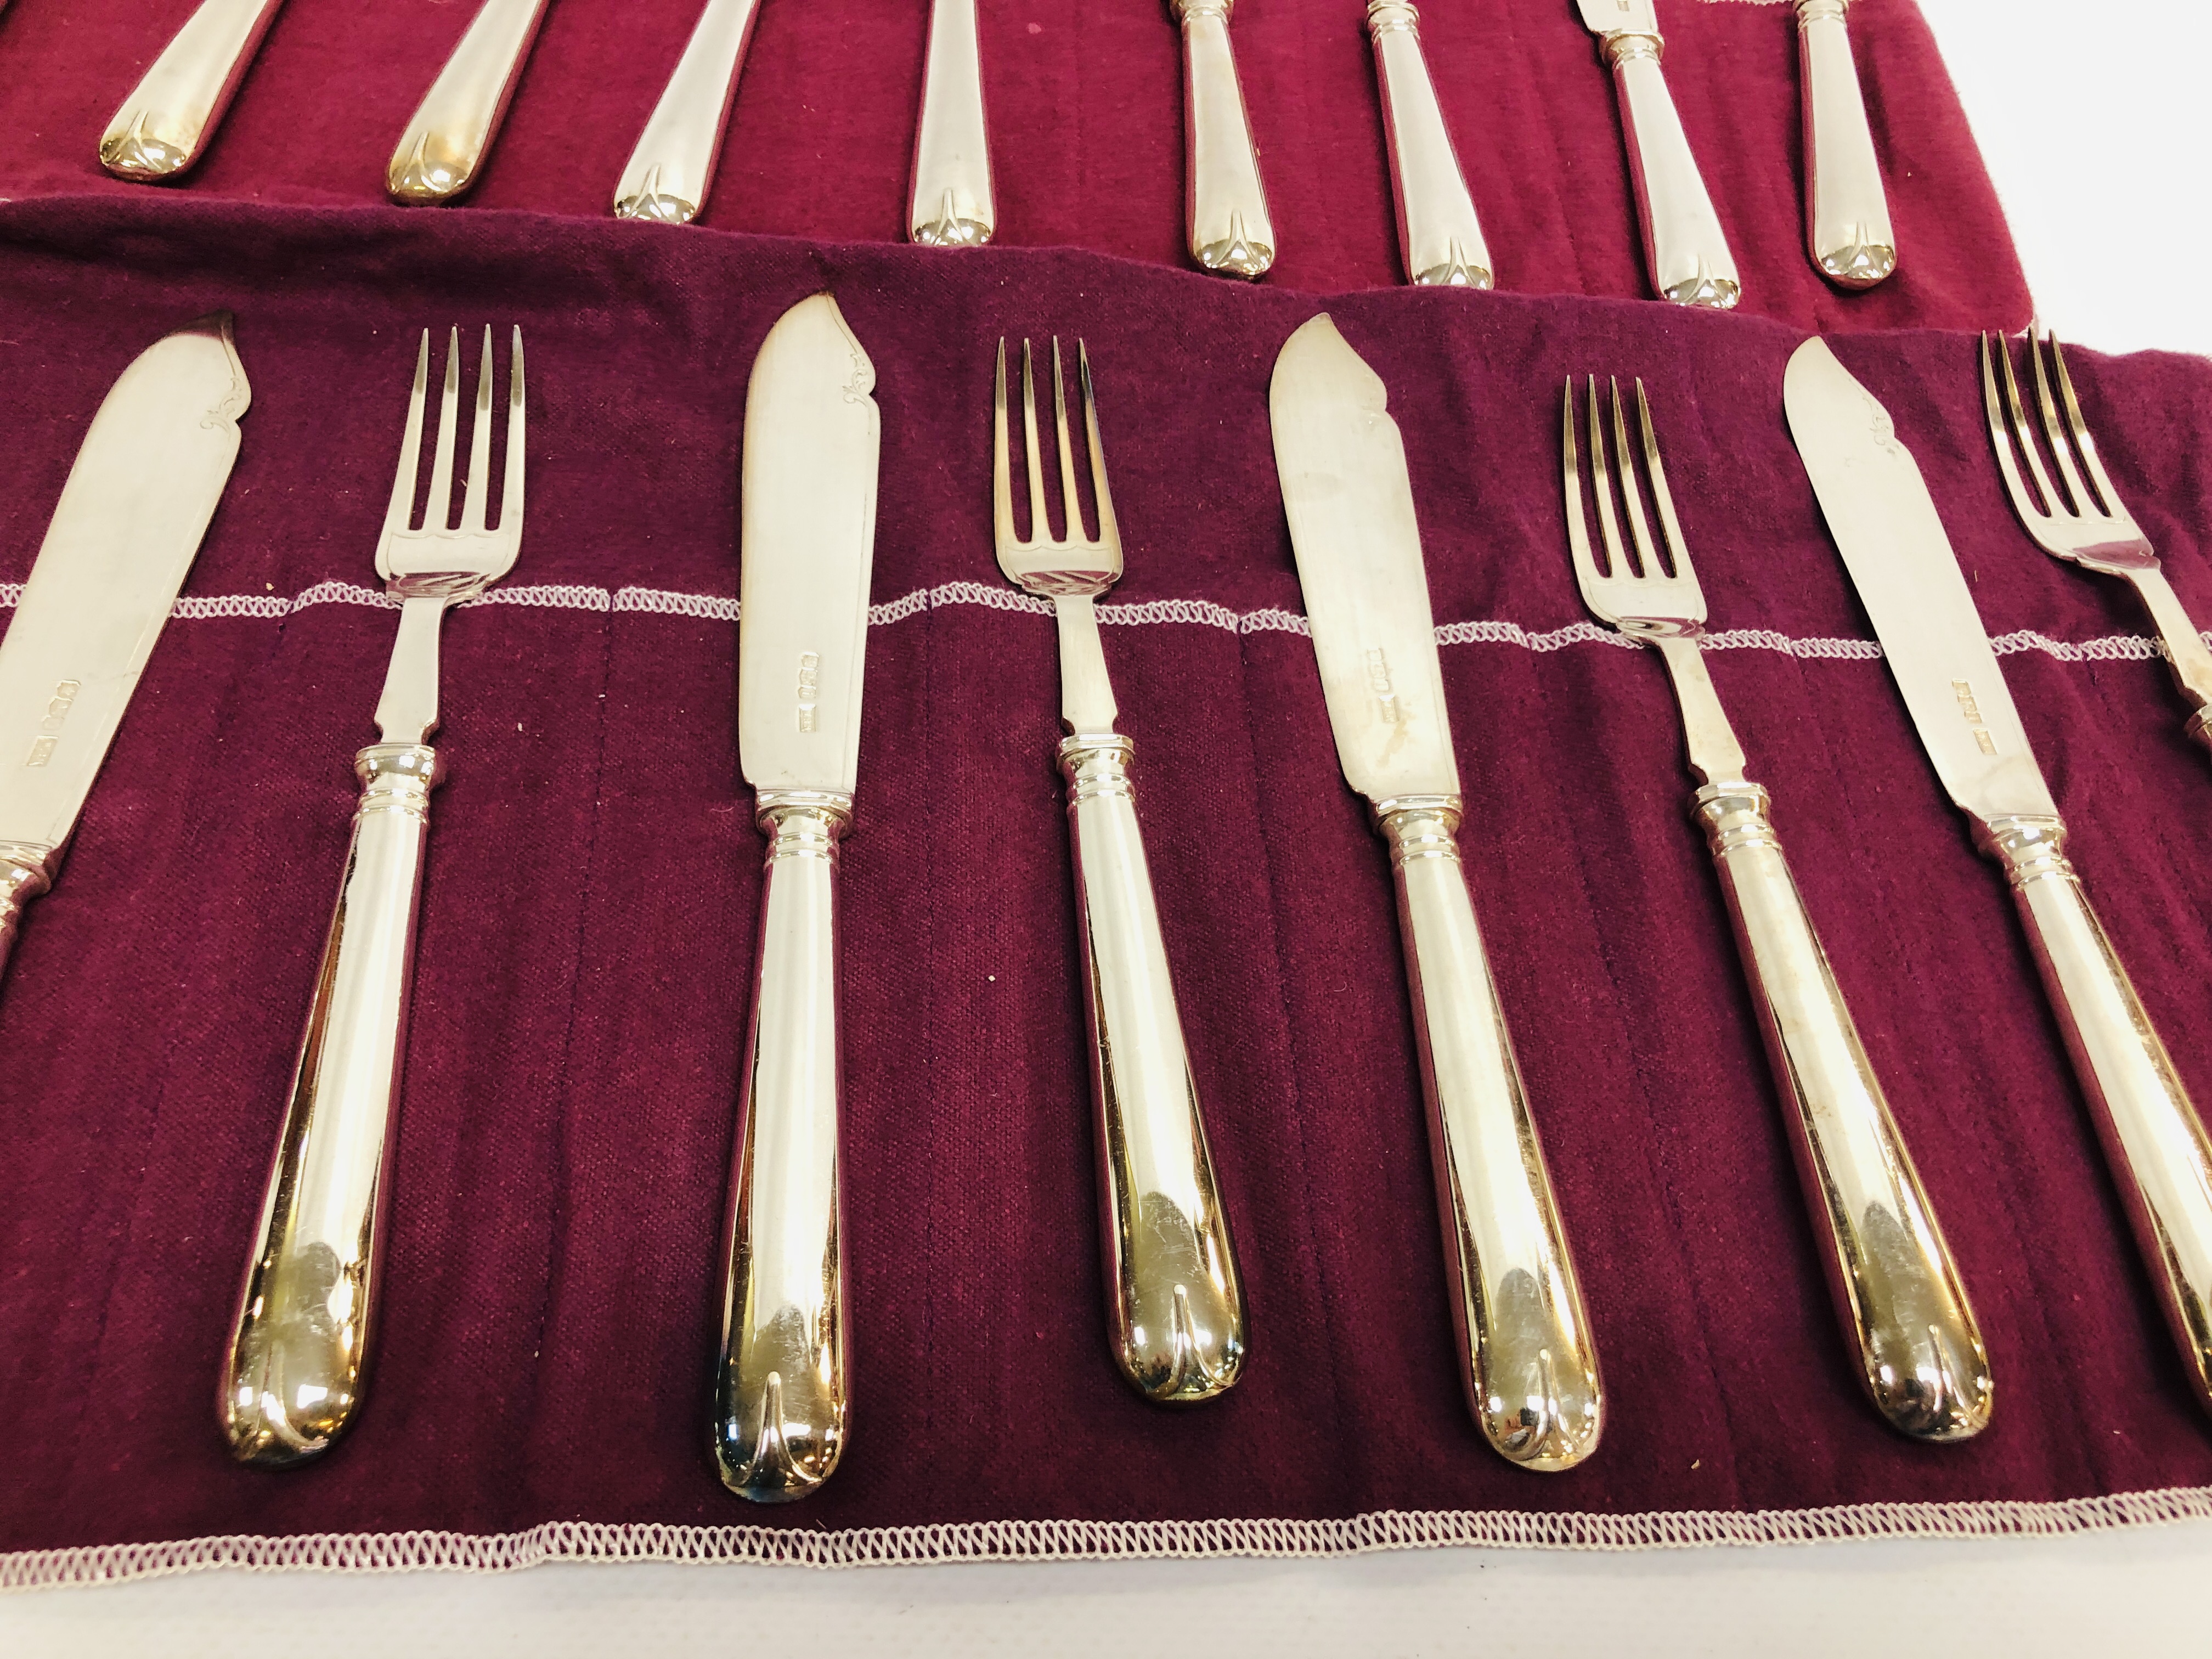 12 SILVER FISH KNIVES AND FORKS, W.R. - Image 3 of 6